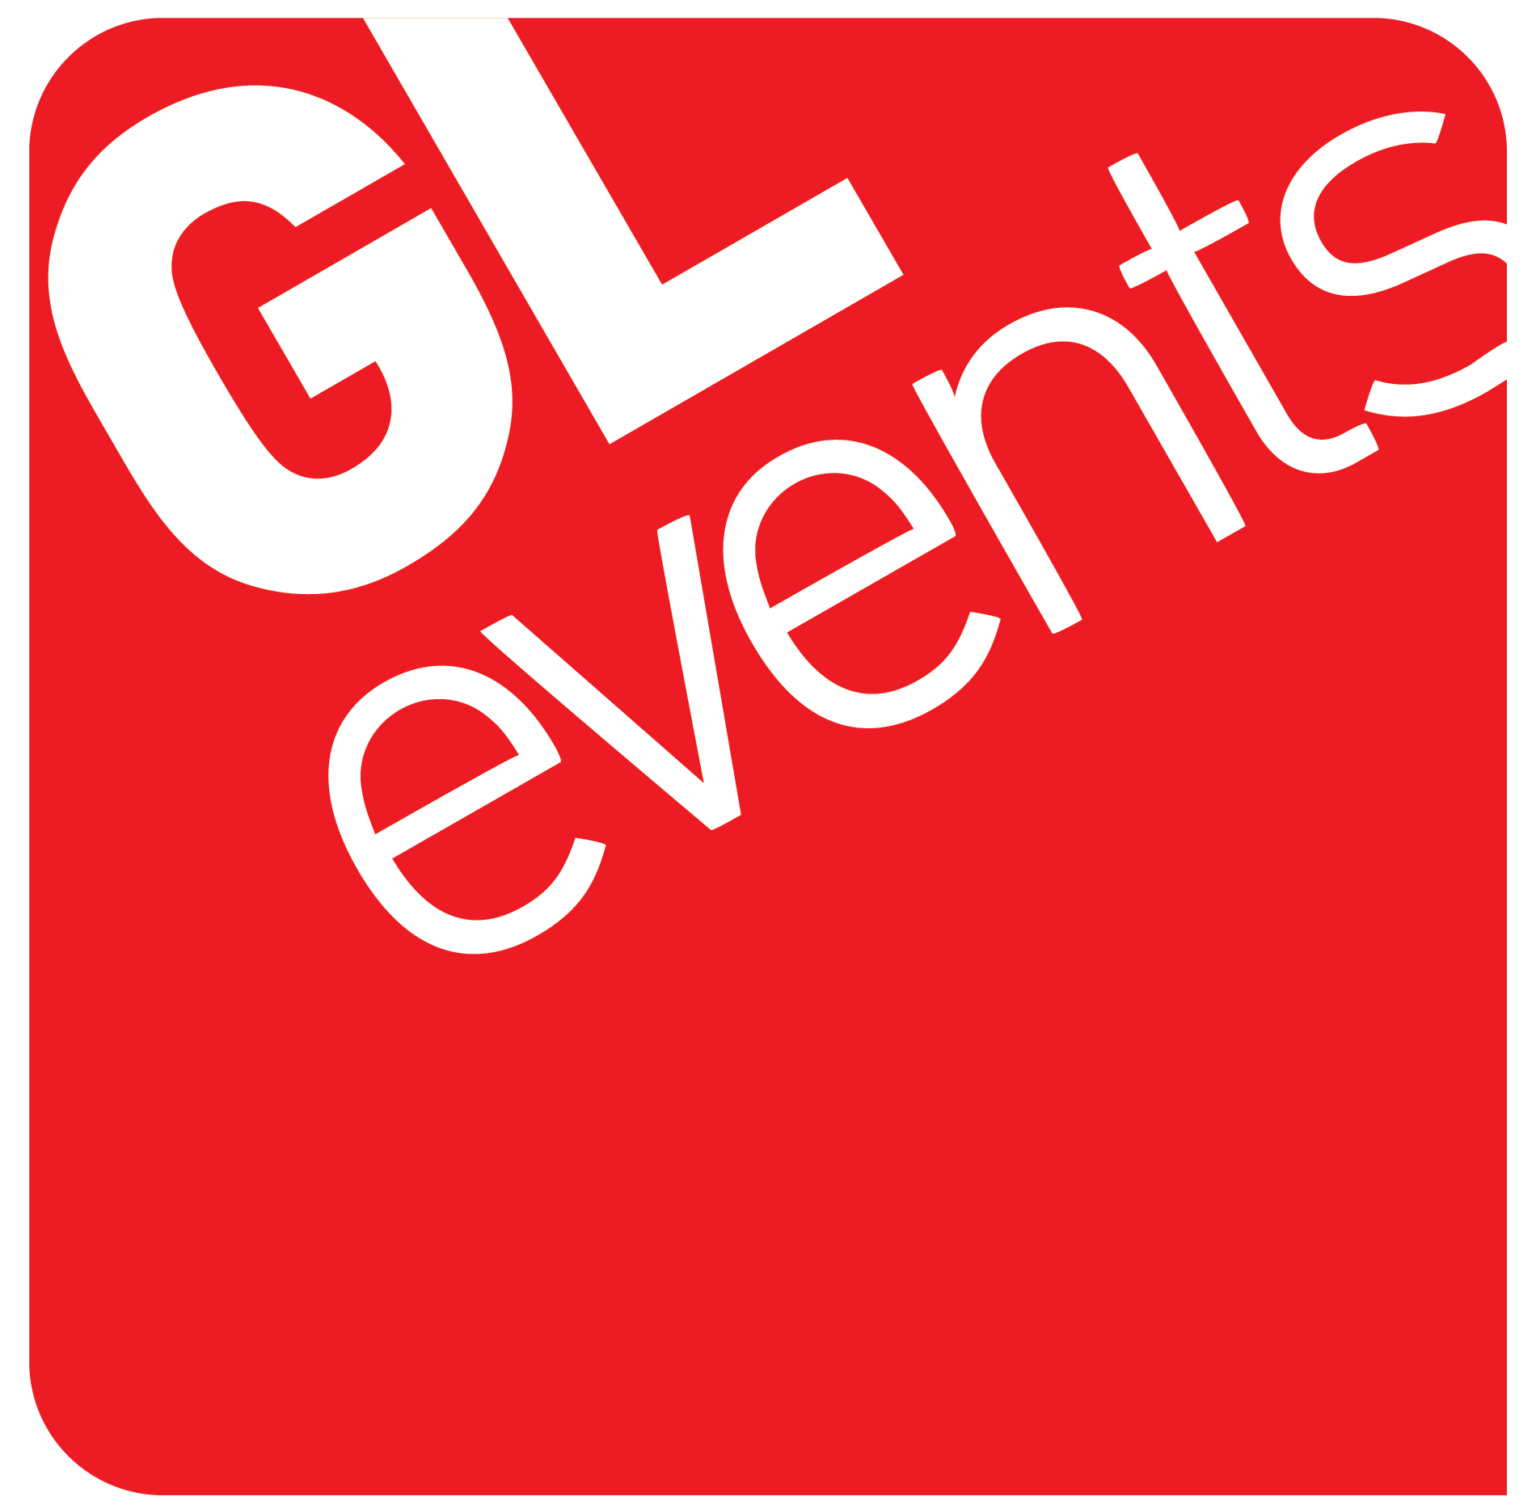 cropped gl events logo png 1536x1509